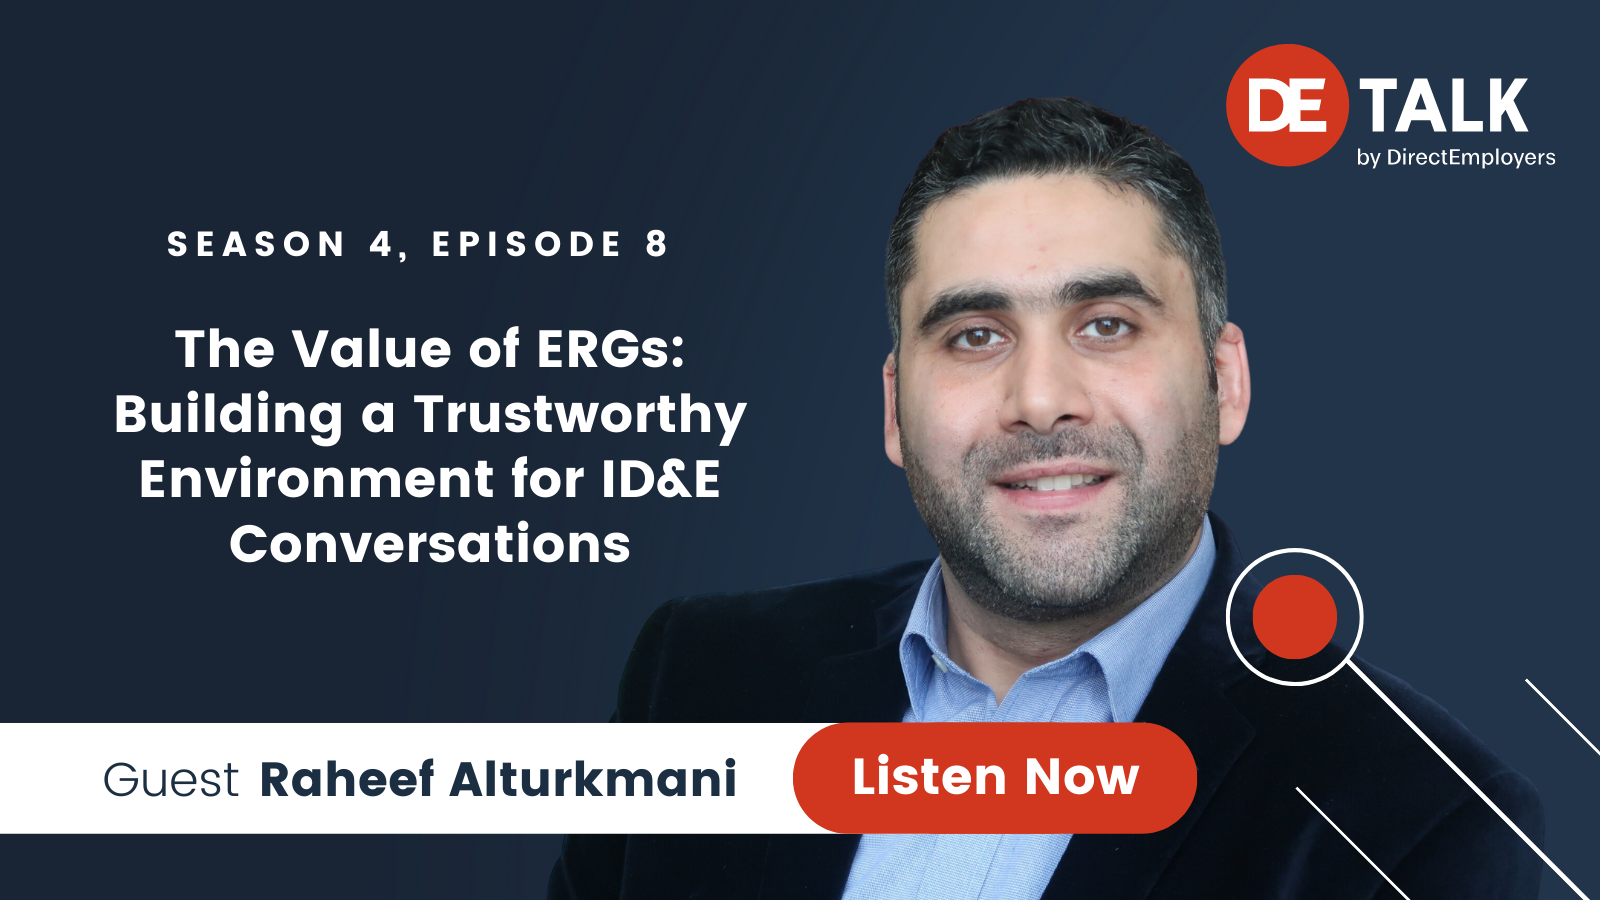 DE Talk | The Value of ERGs: Building a Trustworthy Environment for ID&E Conversations with Raheef Alturkmani